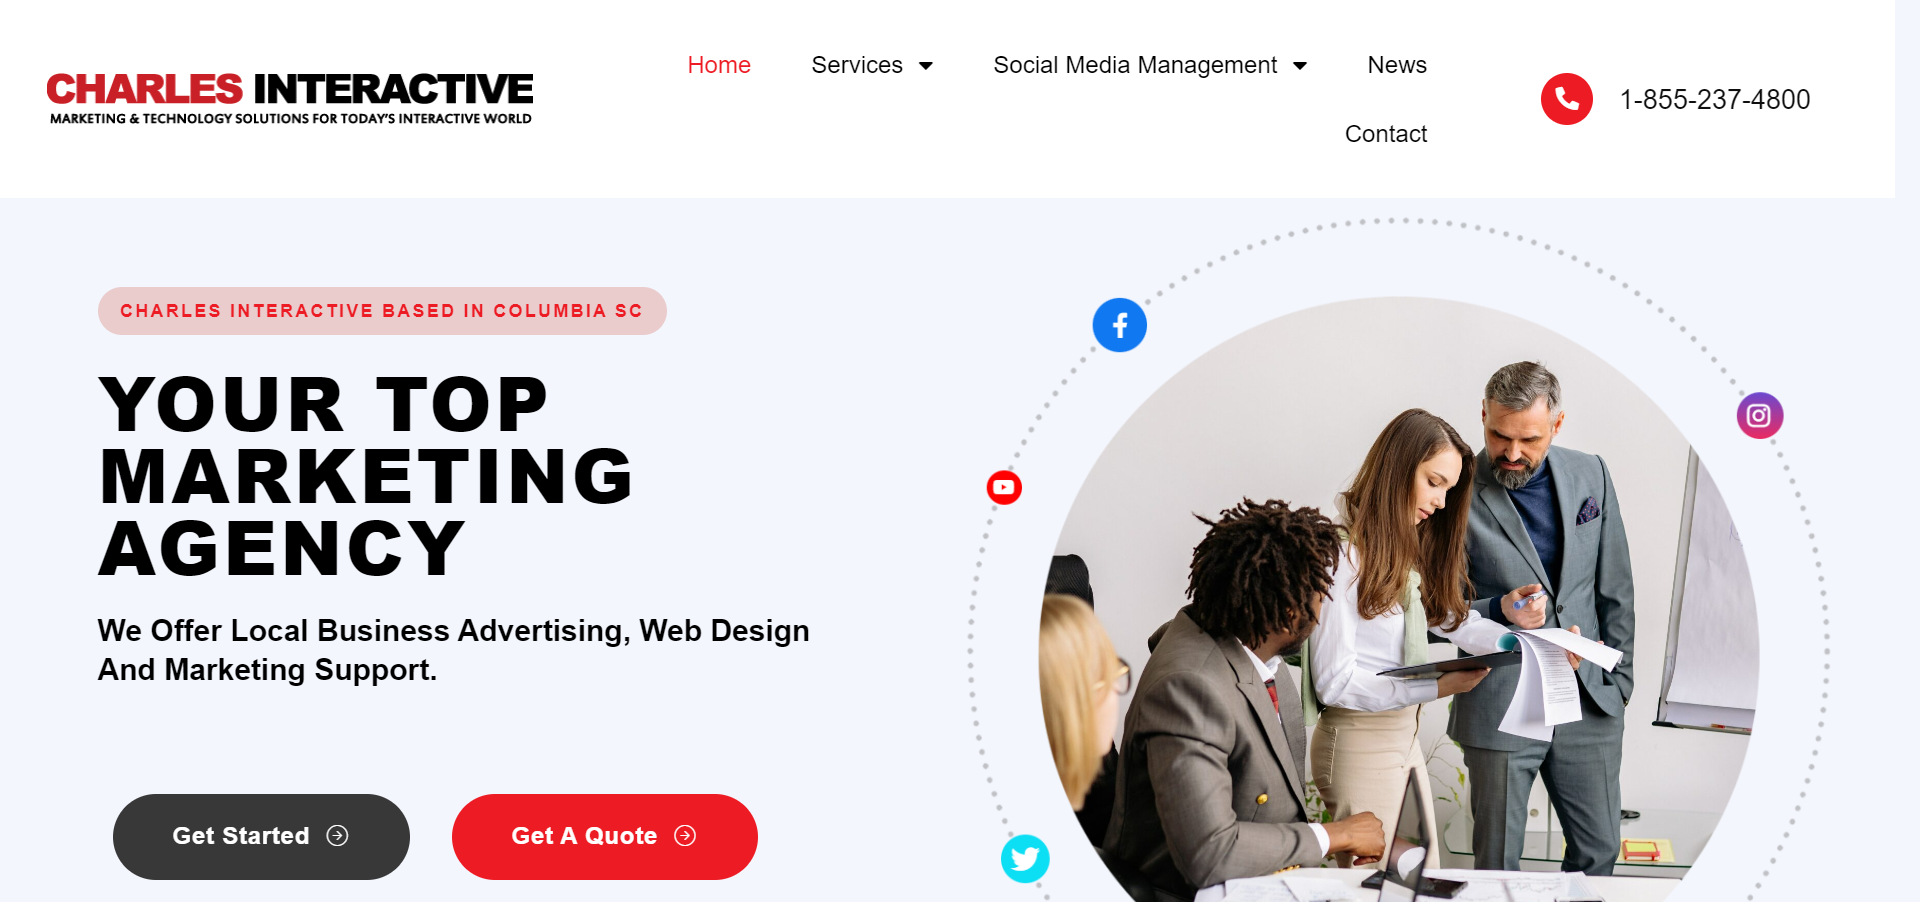 Charles Interactive Web Design Agency